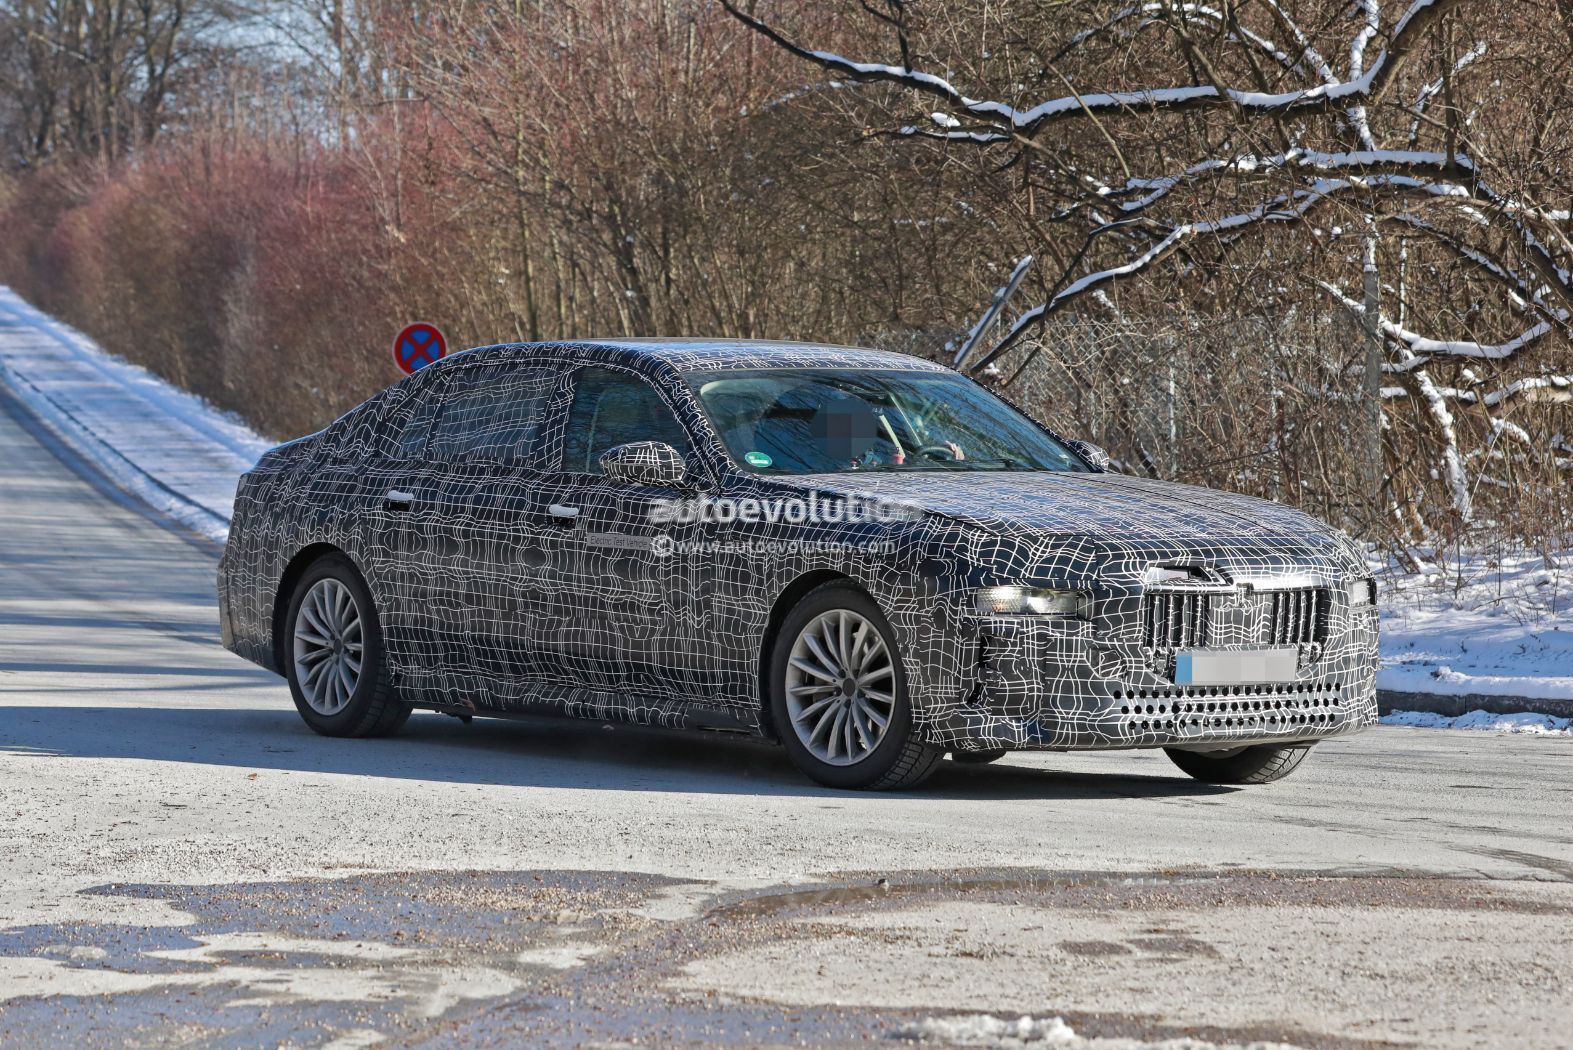 2023 BMW 7 Series and i7 Electric Prototypes Show SelfDriving Tech